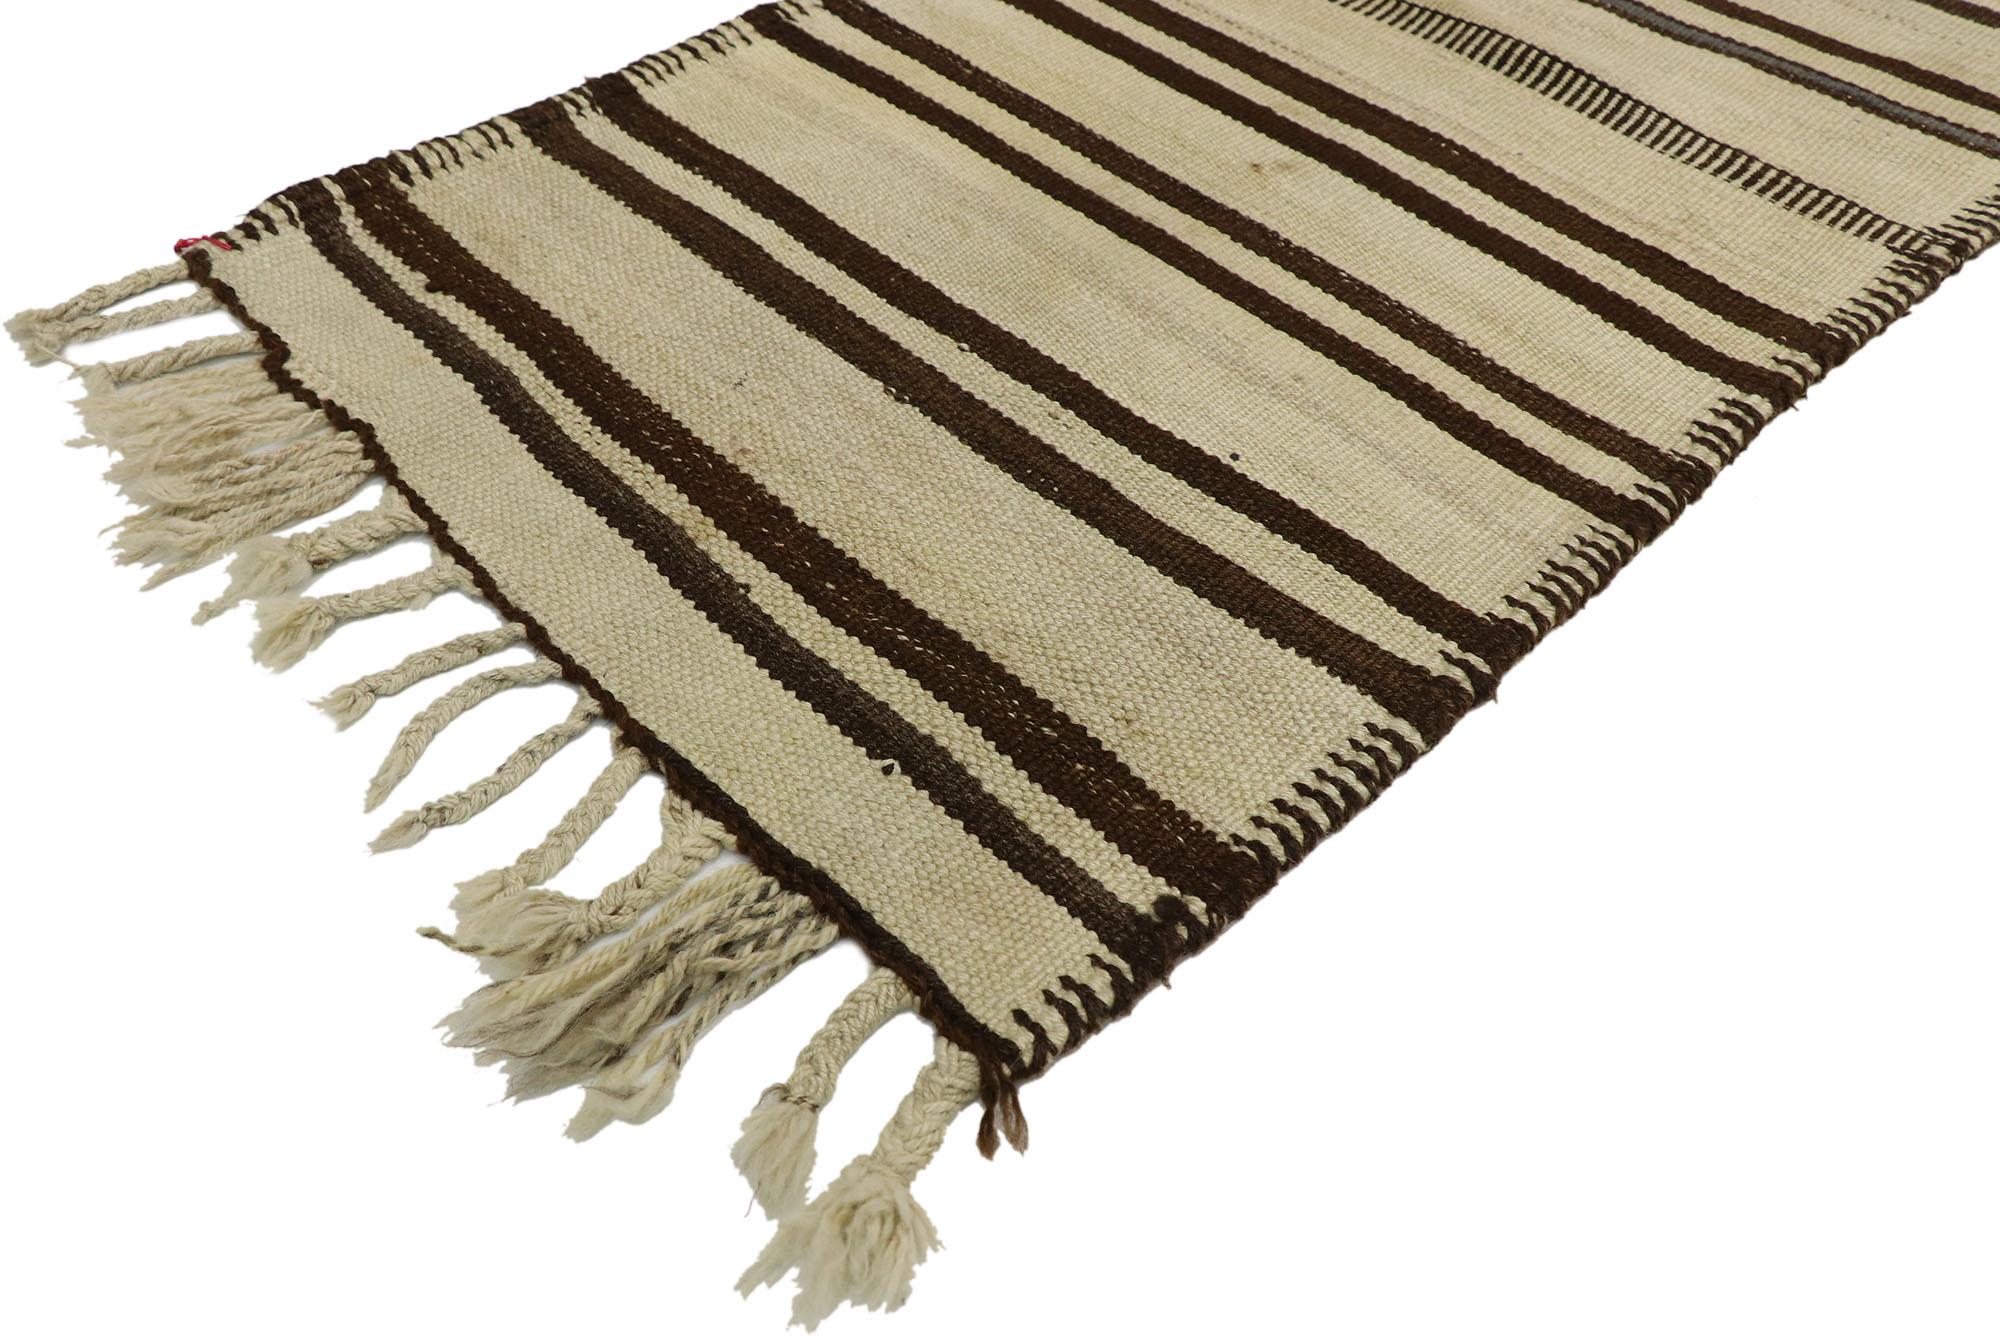 53138, vintage Turkish striped Kilim runner with Modern style. With its warm hues and rugged beauty, this handwoven wool vintage Turkish kilim rug features a modern style, yet it still reflects an understated appearance ideal for modern,